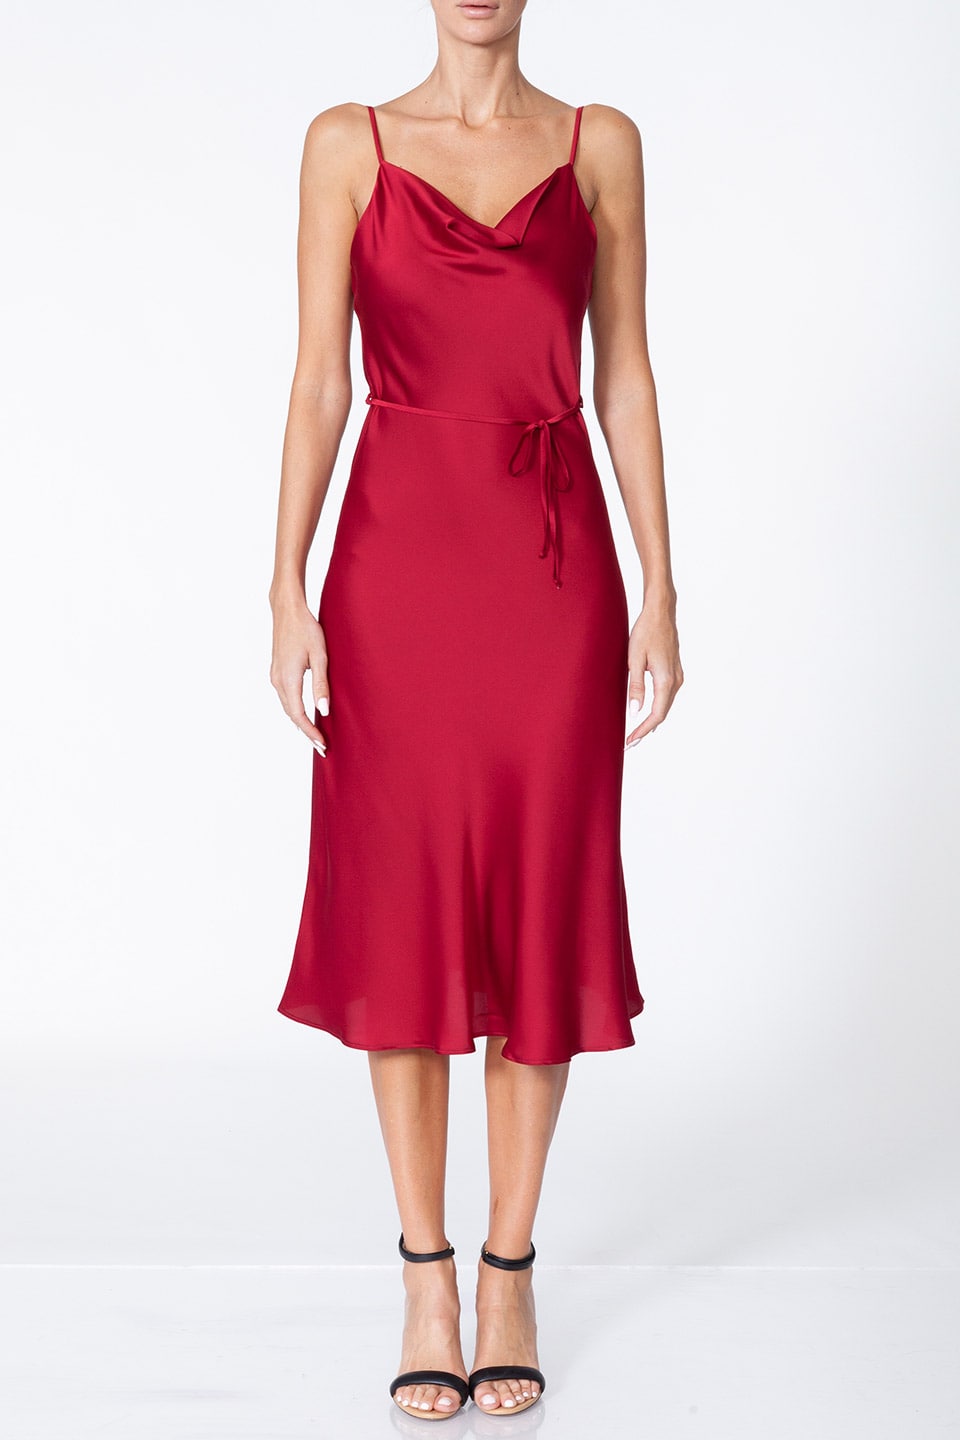 Fashion stylist dress same day delivery in Dubai. Shop online special occasions red midi dress